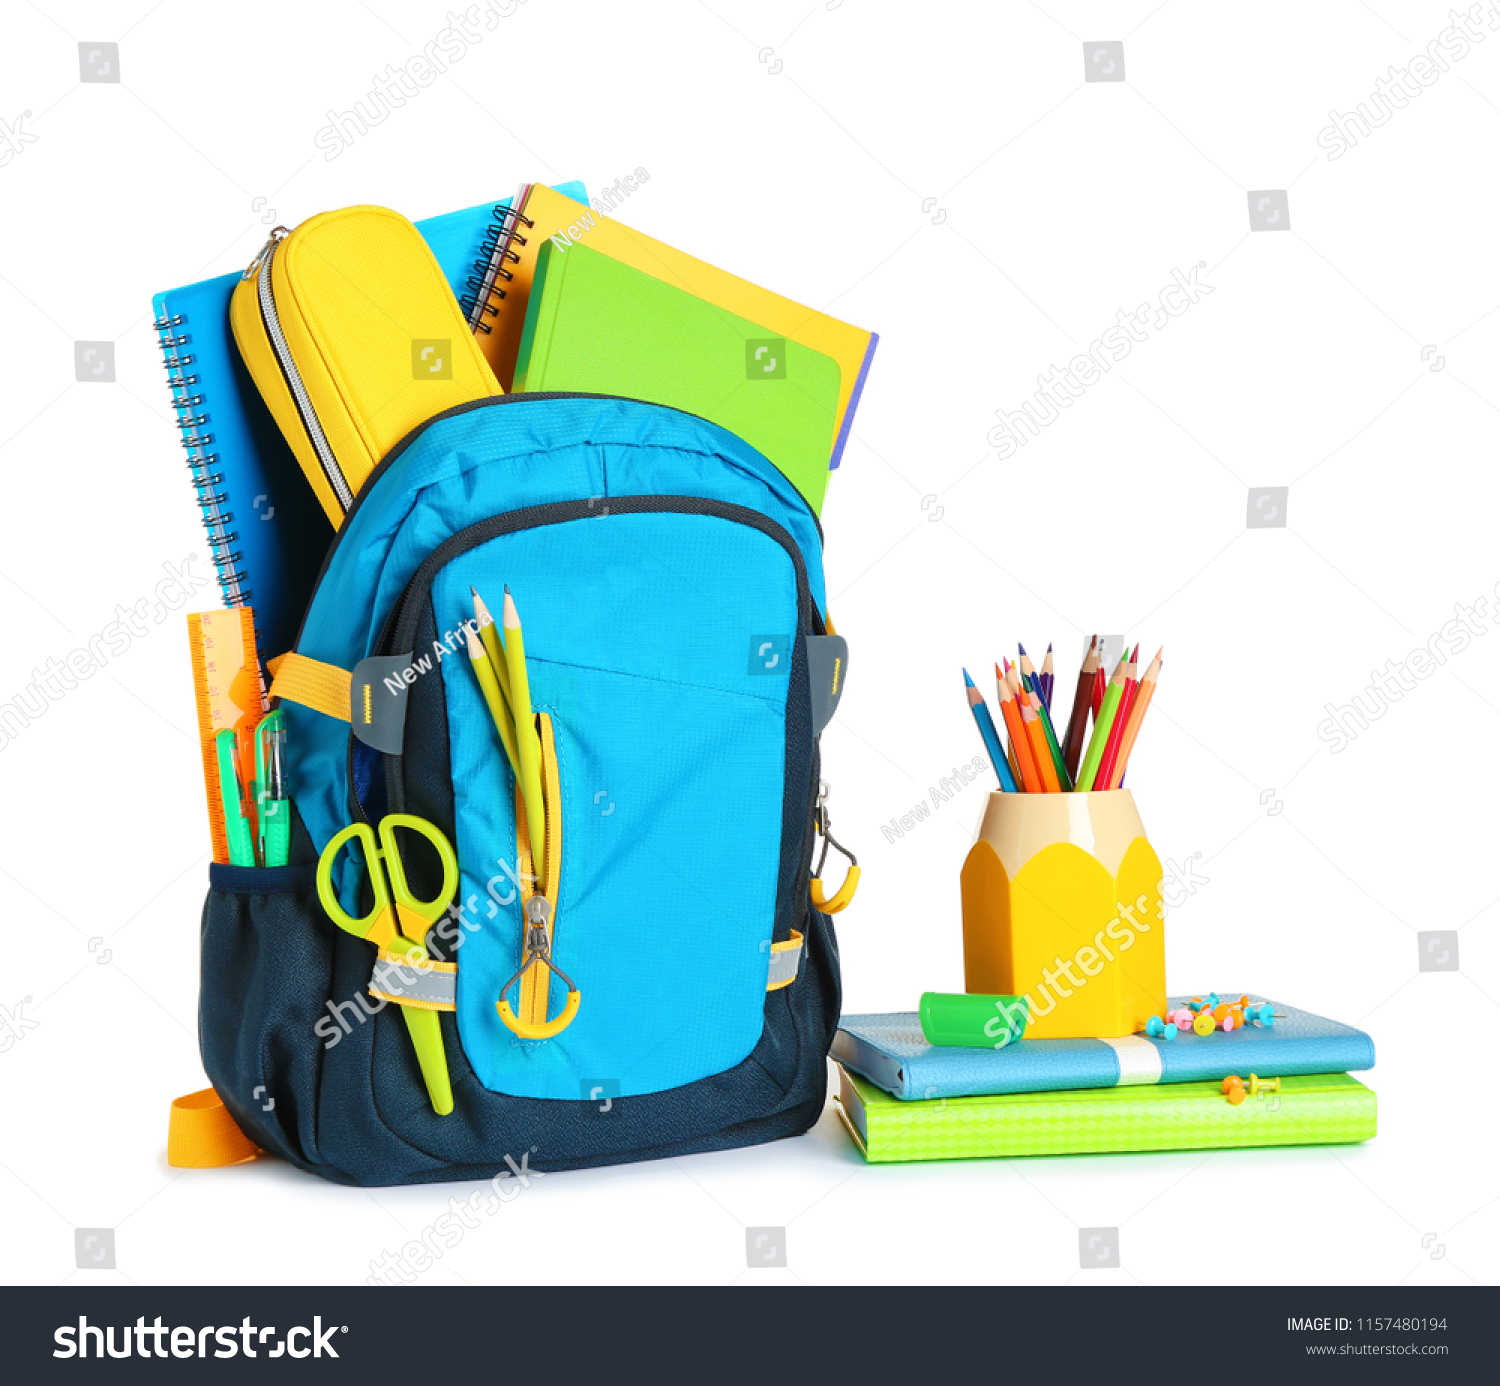 Backpack with school stationery on white background #1157480194